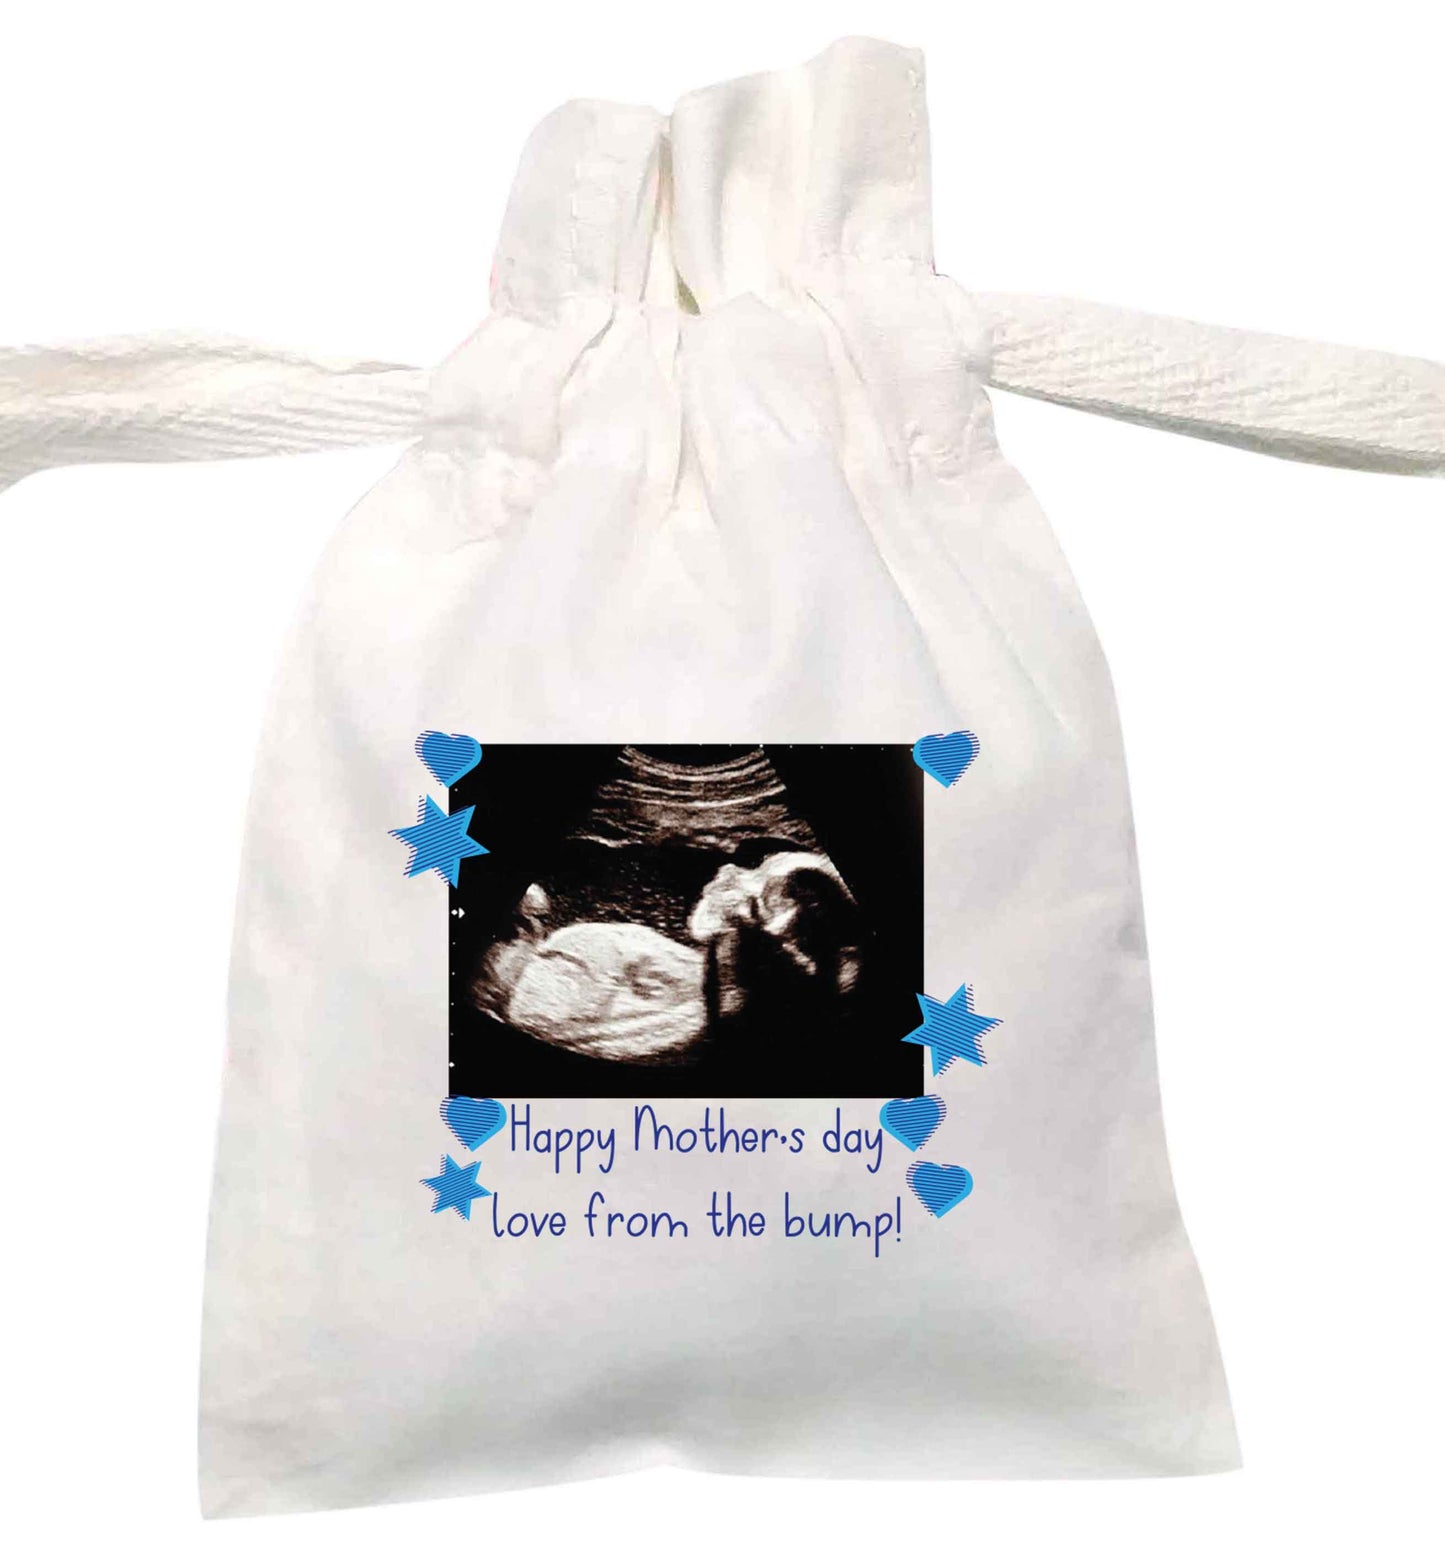 Happy Mother's day love from the bump - blue | XS - L | Pouch / Drawstring bag / Sack | Organic Cotton | Bulk discounts available!